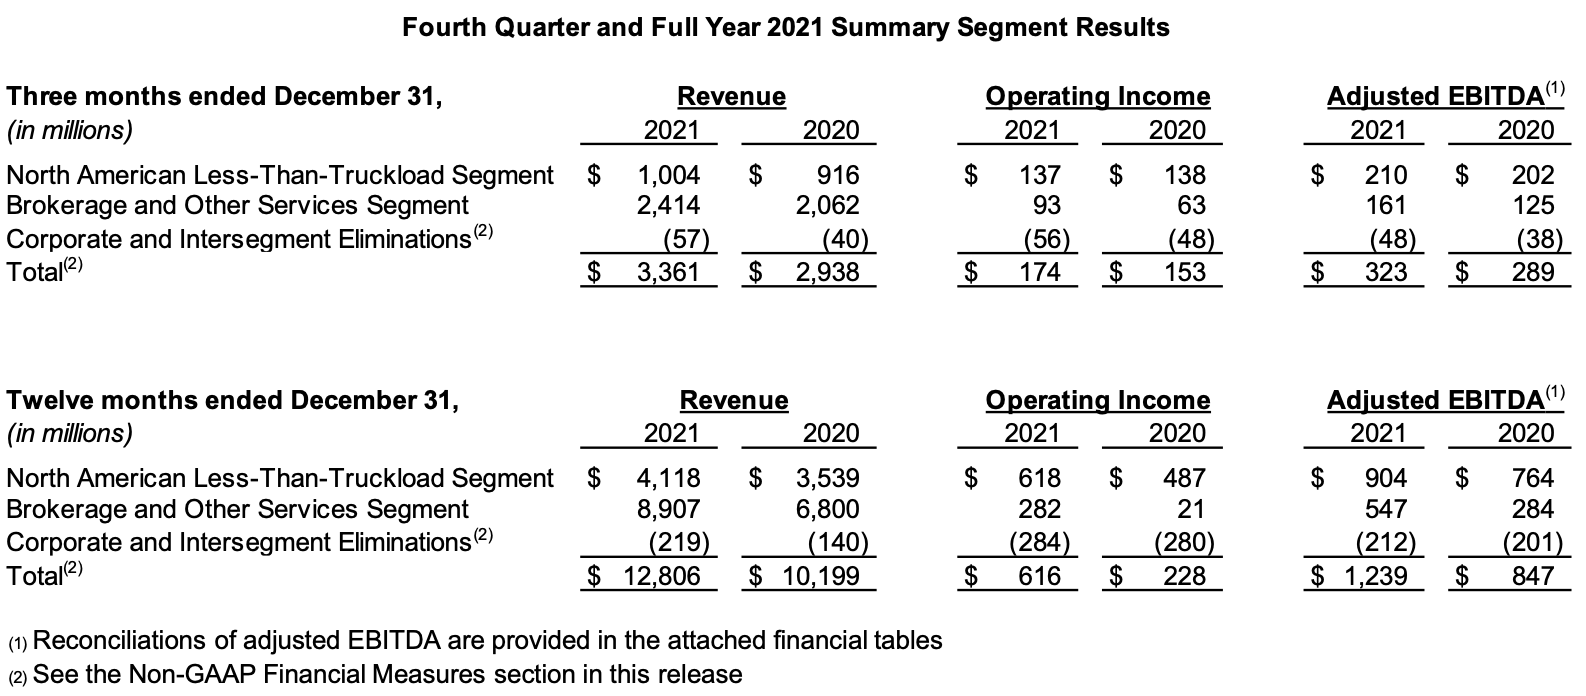 Fourth Quarter and Full Year 2021 Summary Segment Results